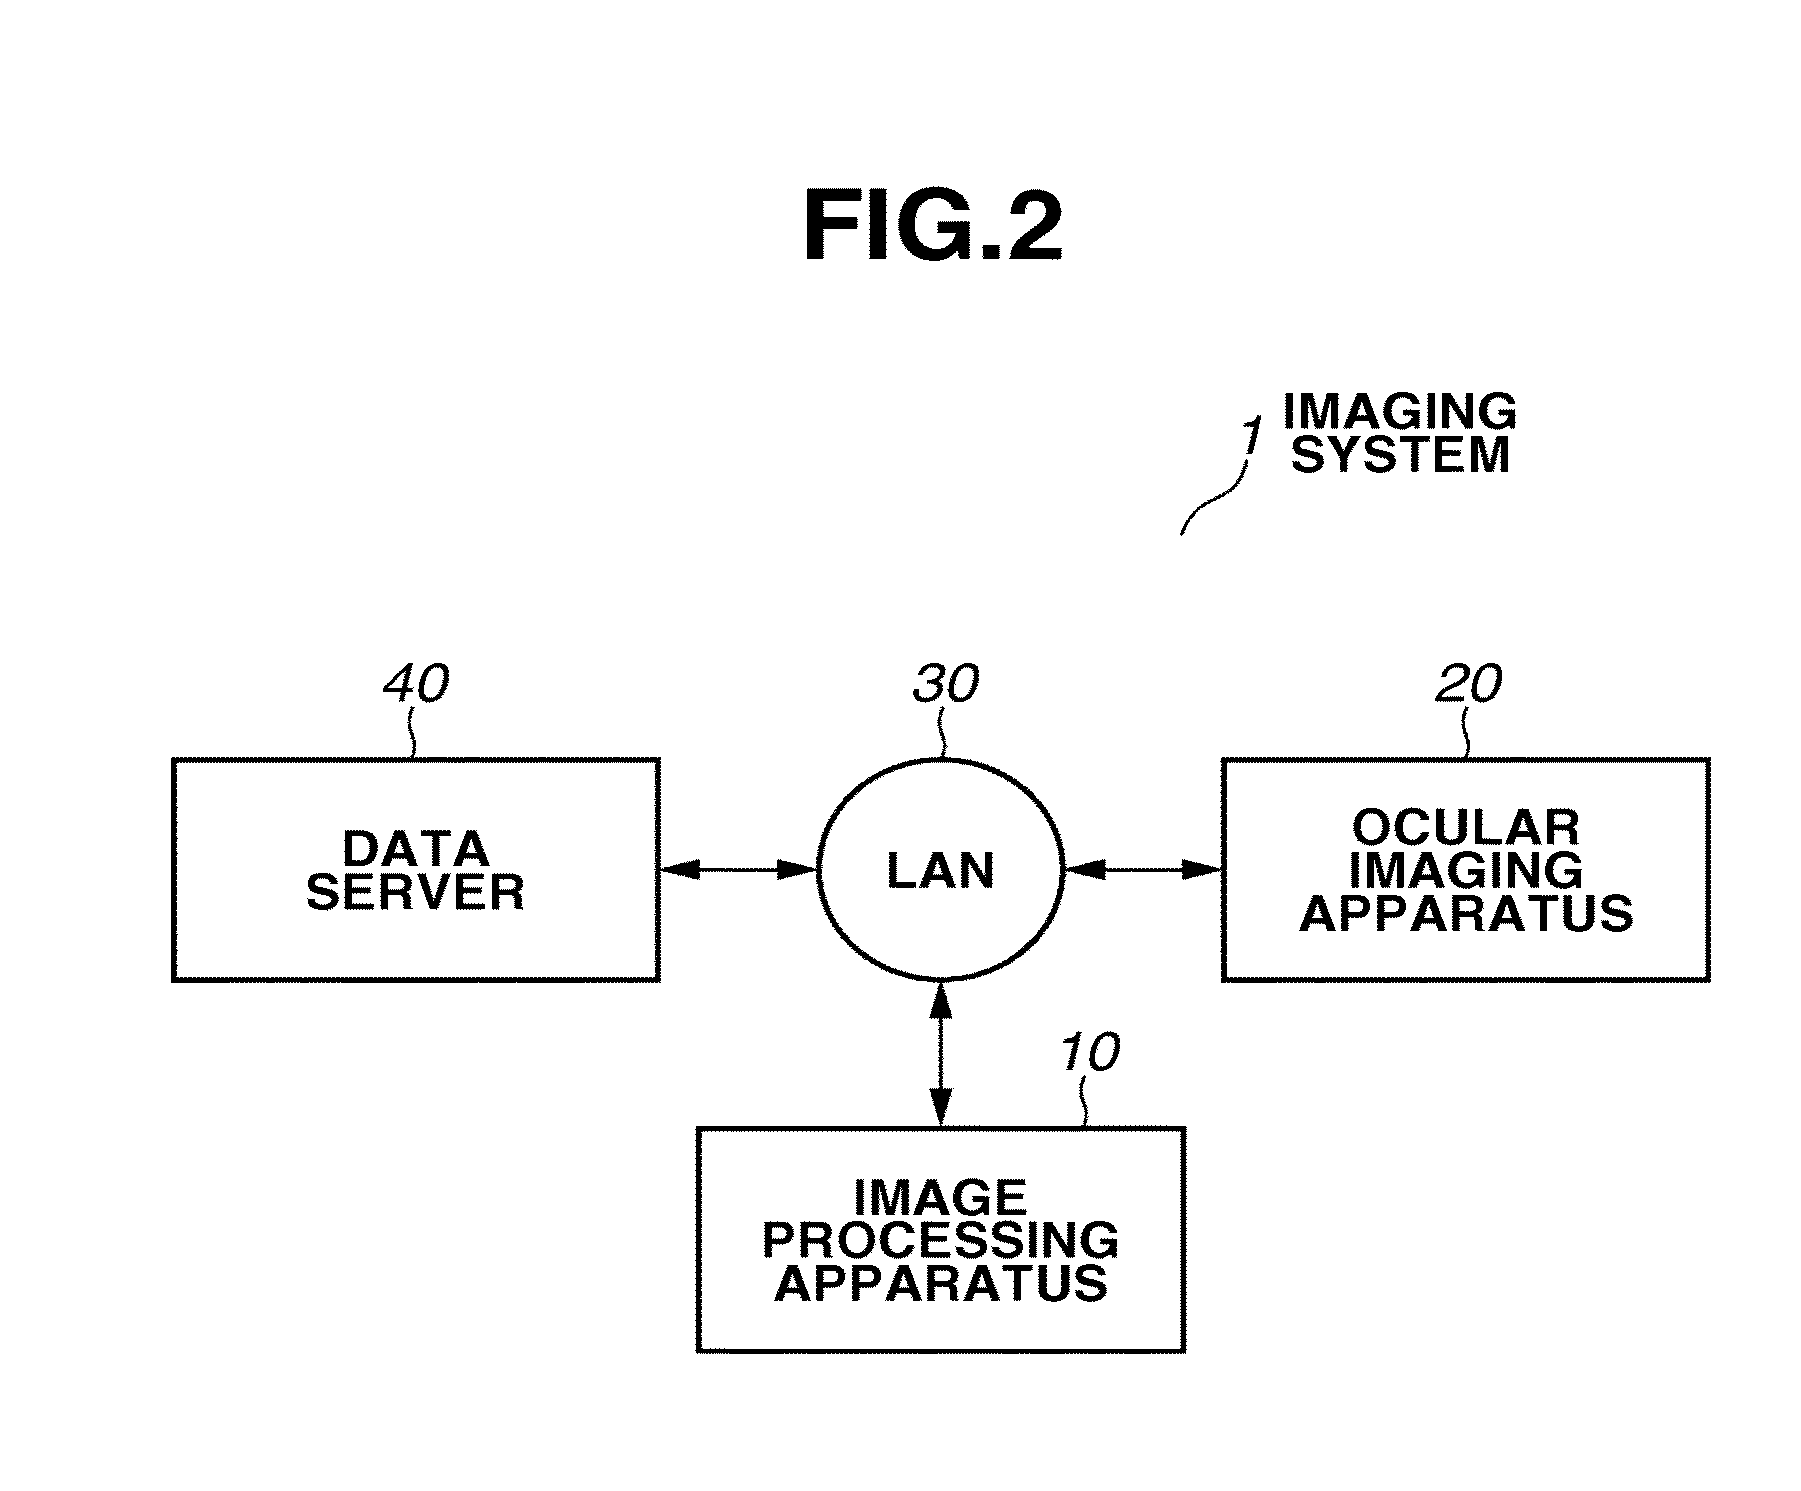 Image processing apparatus and image processing system for displaying information about ocular blood flow